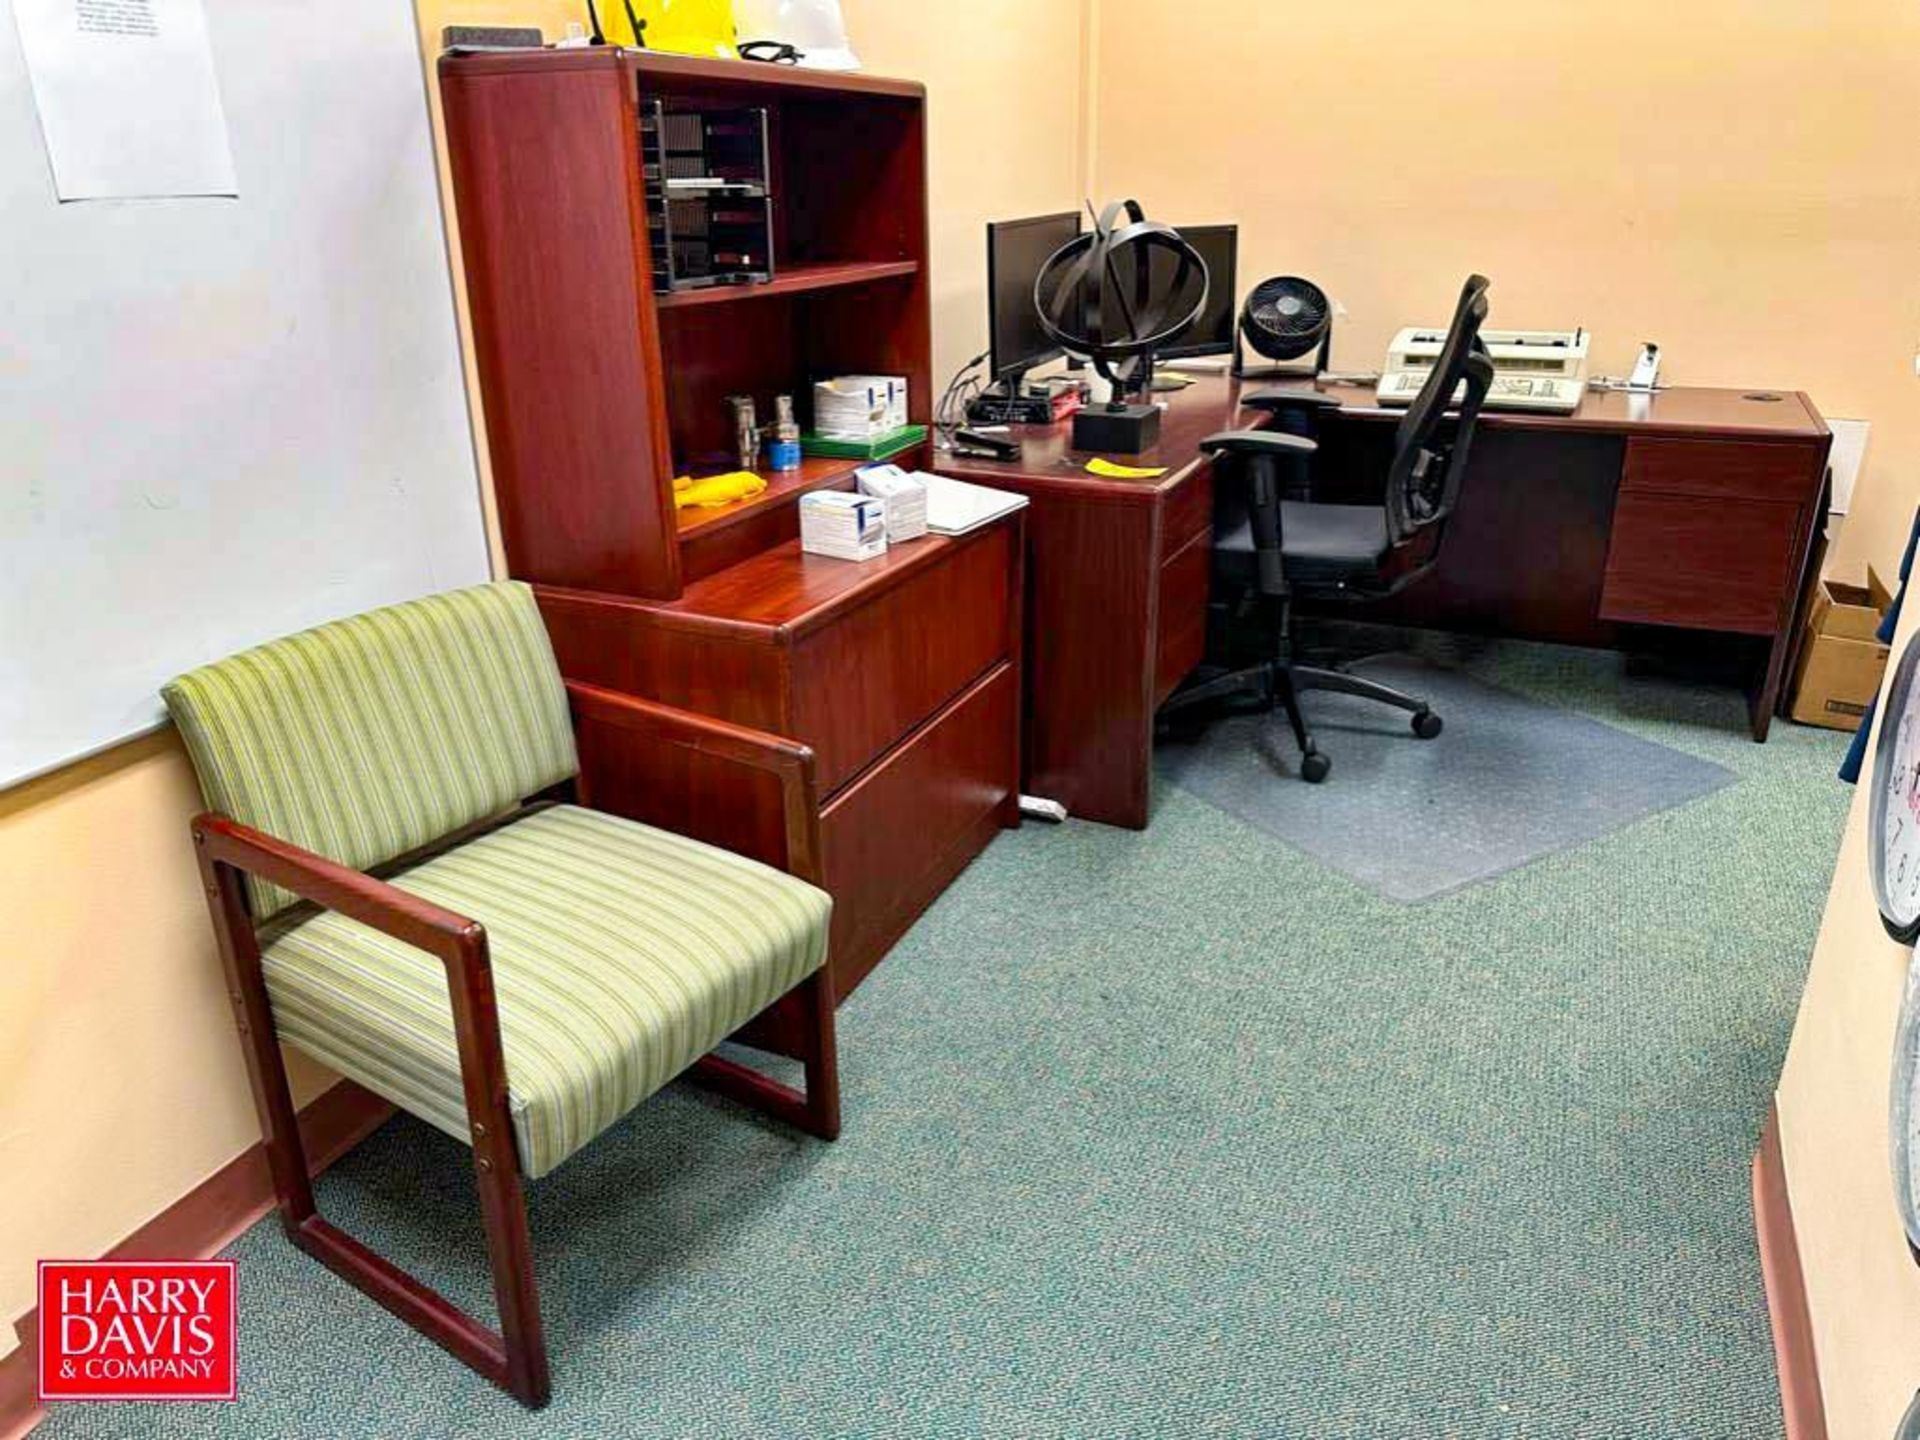 (2) L-Shaped Desks, Lateral File Cabinet, Typewriter, Chairs and Monitors - Rigging Fee: $350